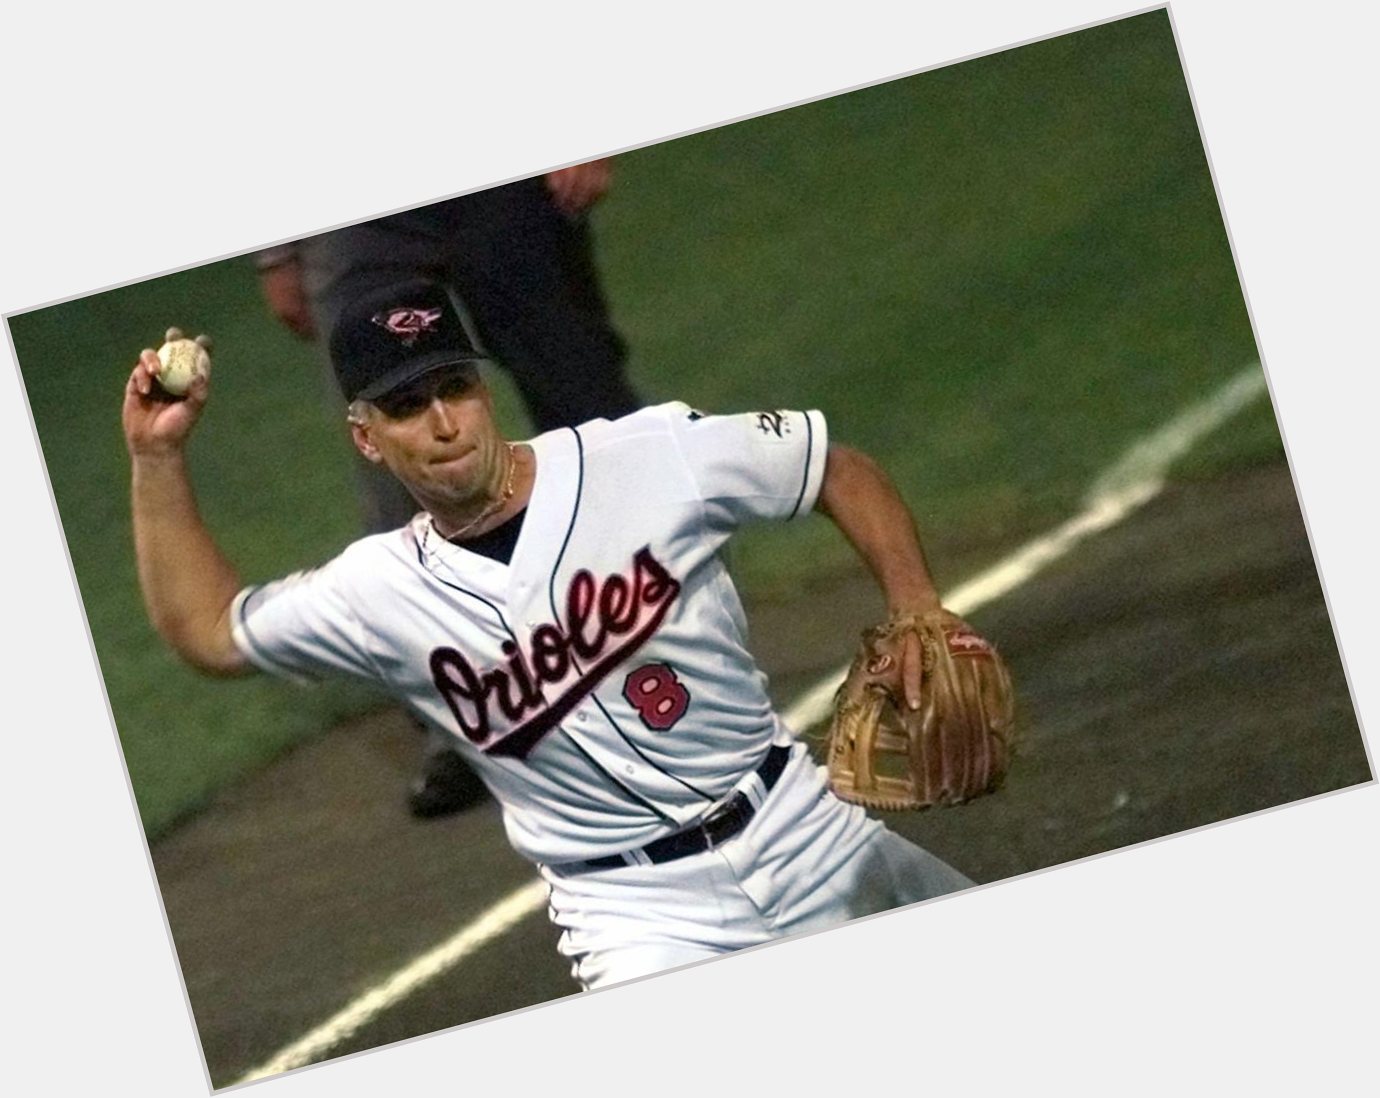 Happy Birthday to the greatest to ever play the game, Cal Ripken Jr! 